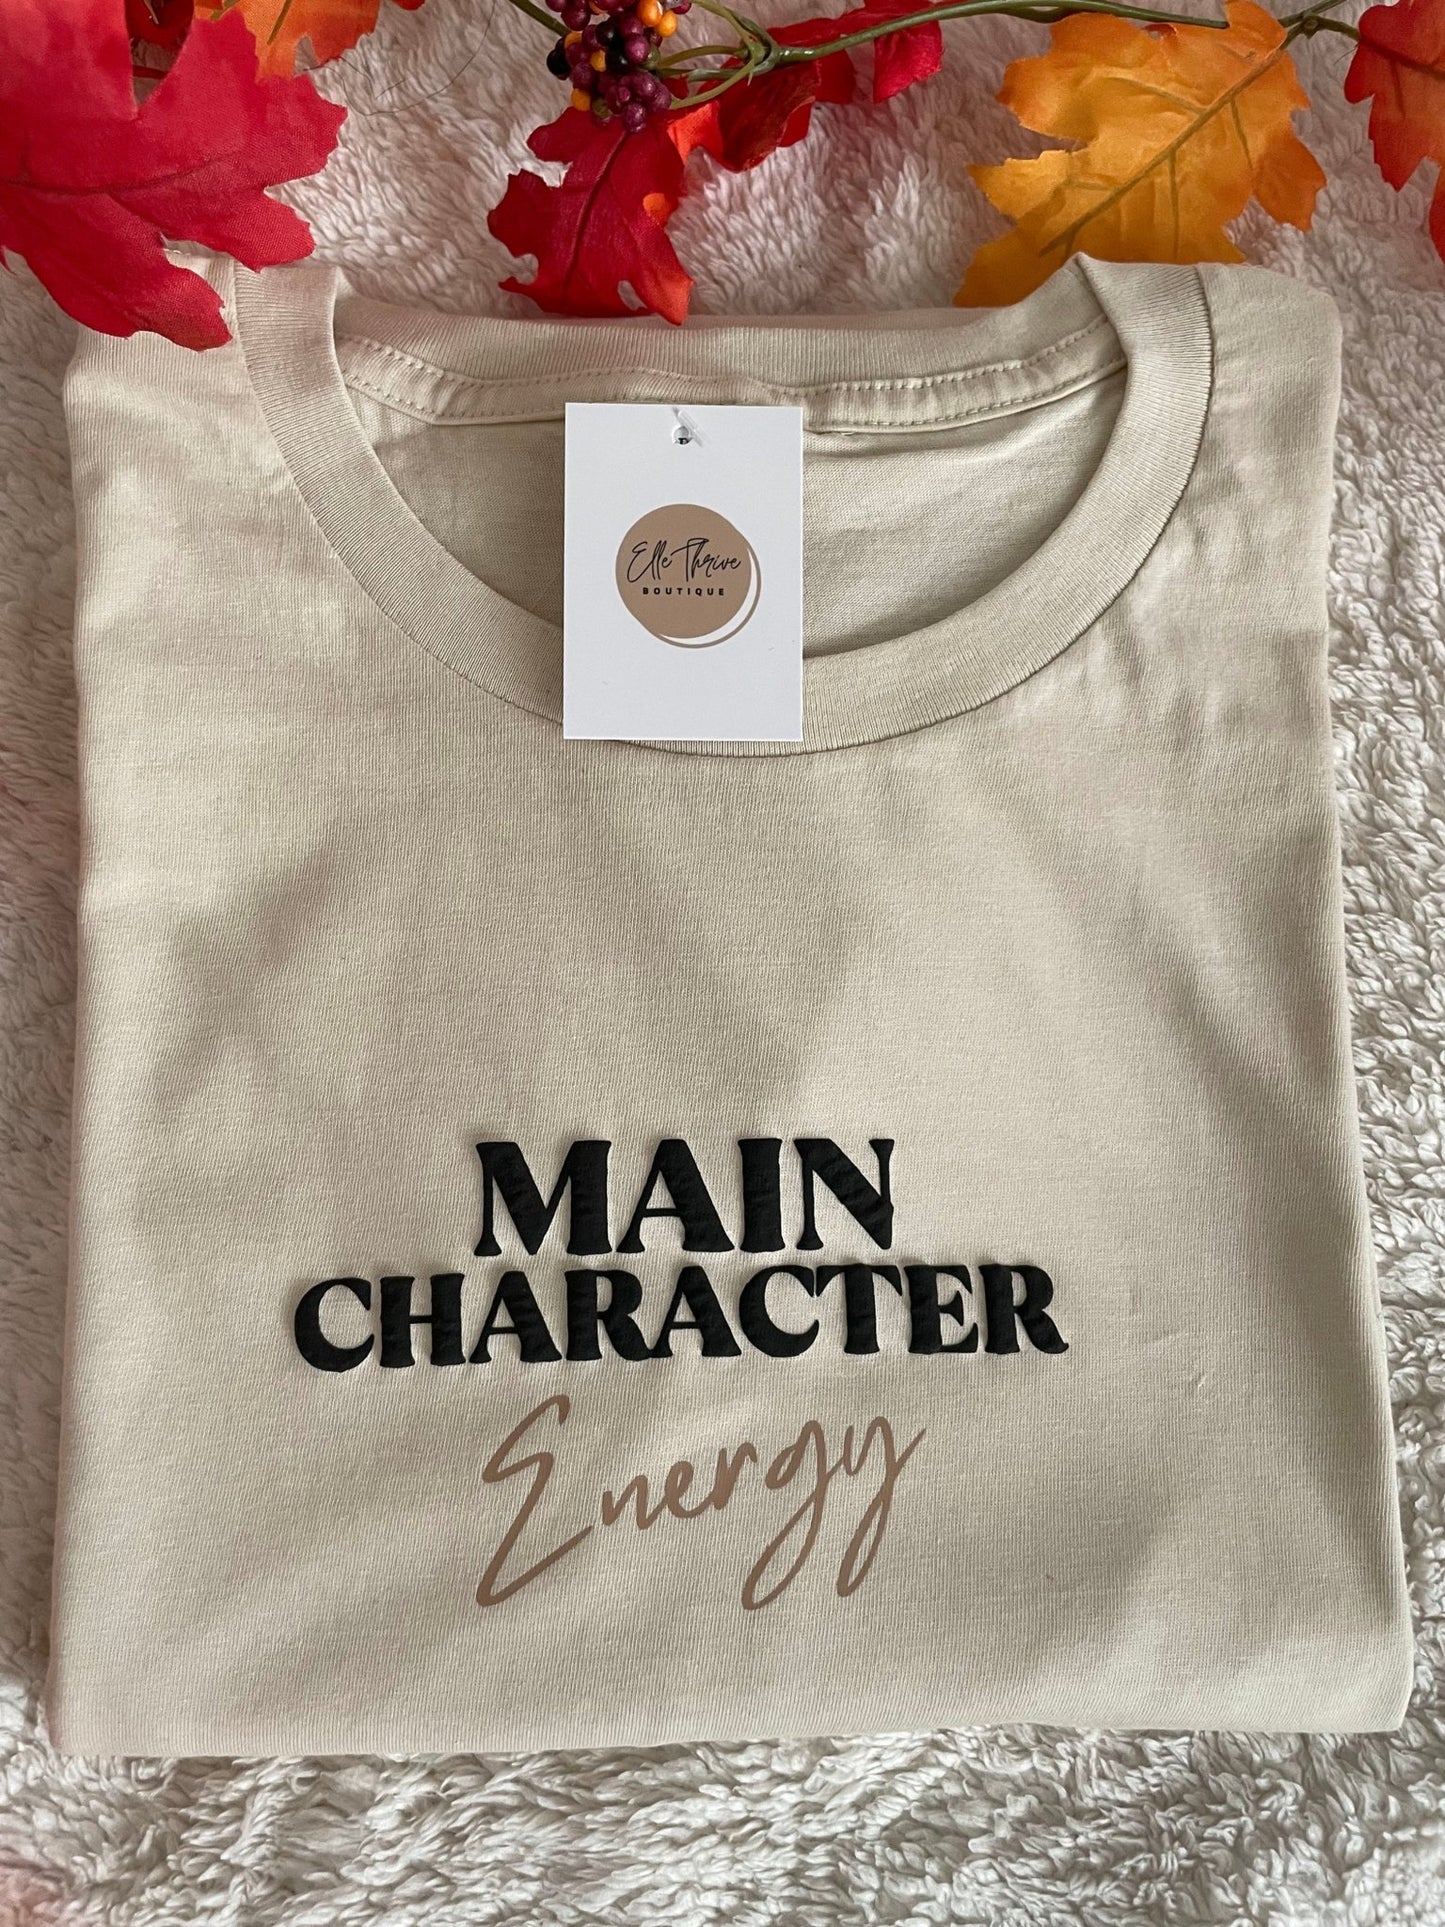 Main Character Energy T-shirt - Elle Thrive Boutique